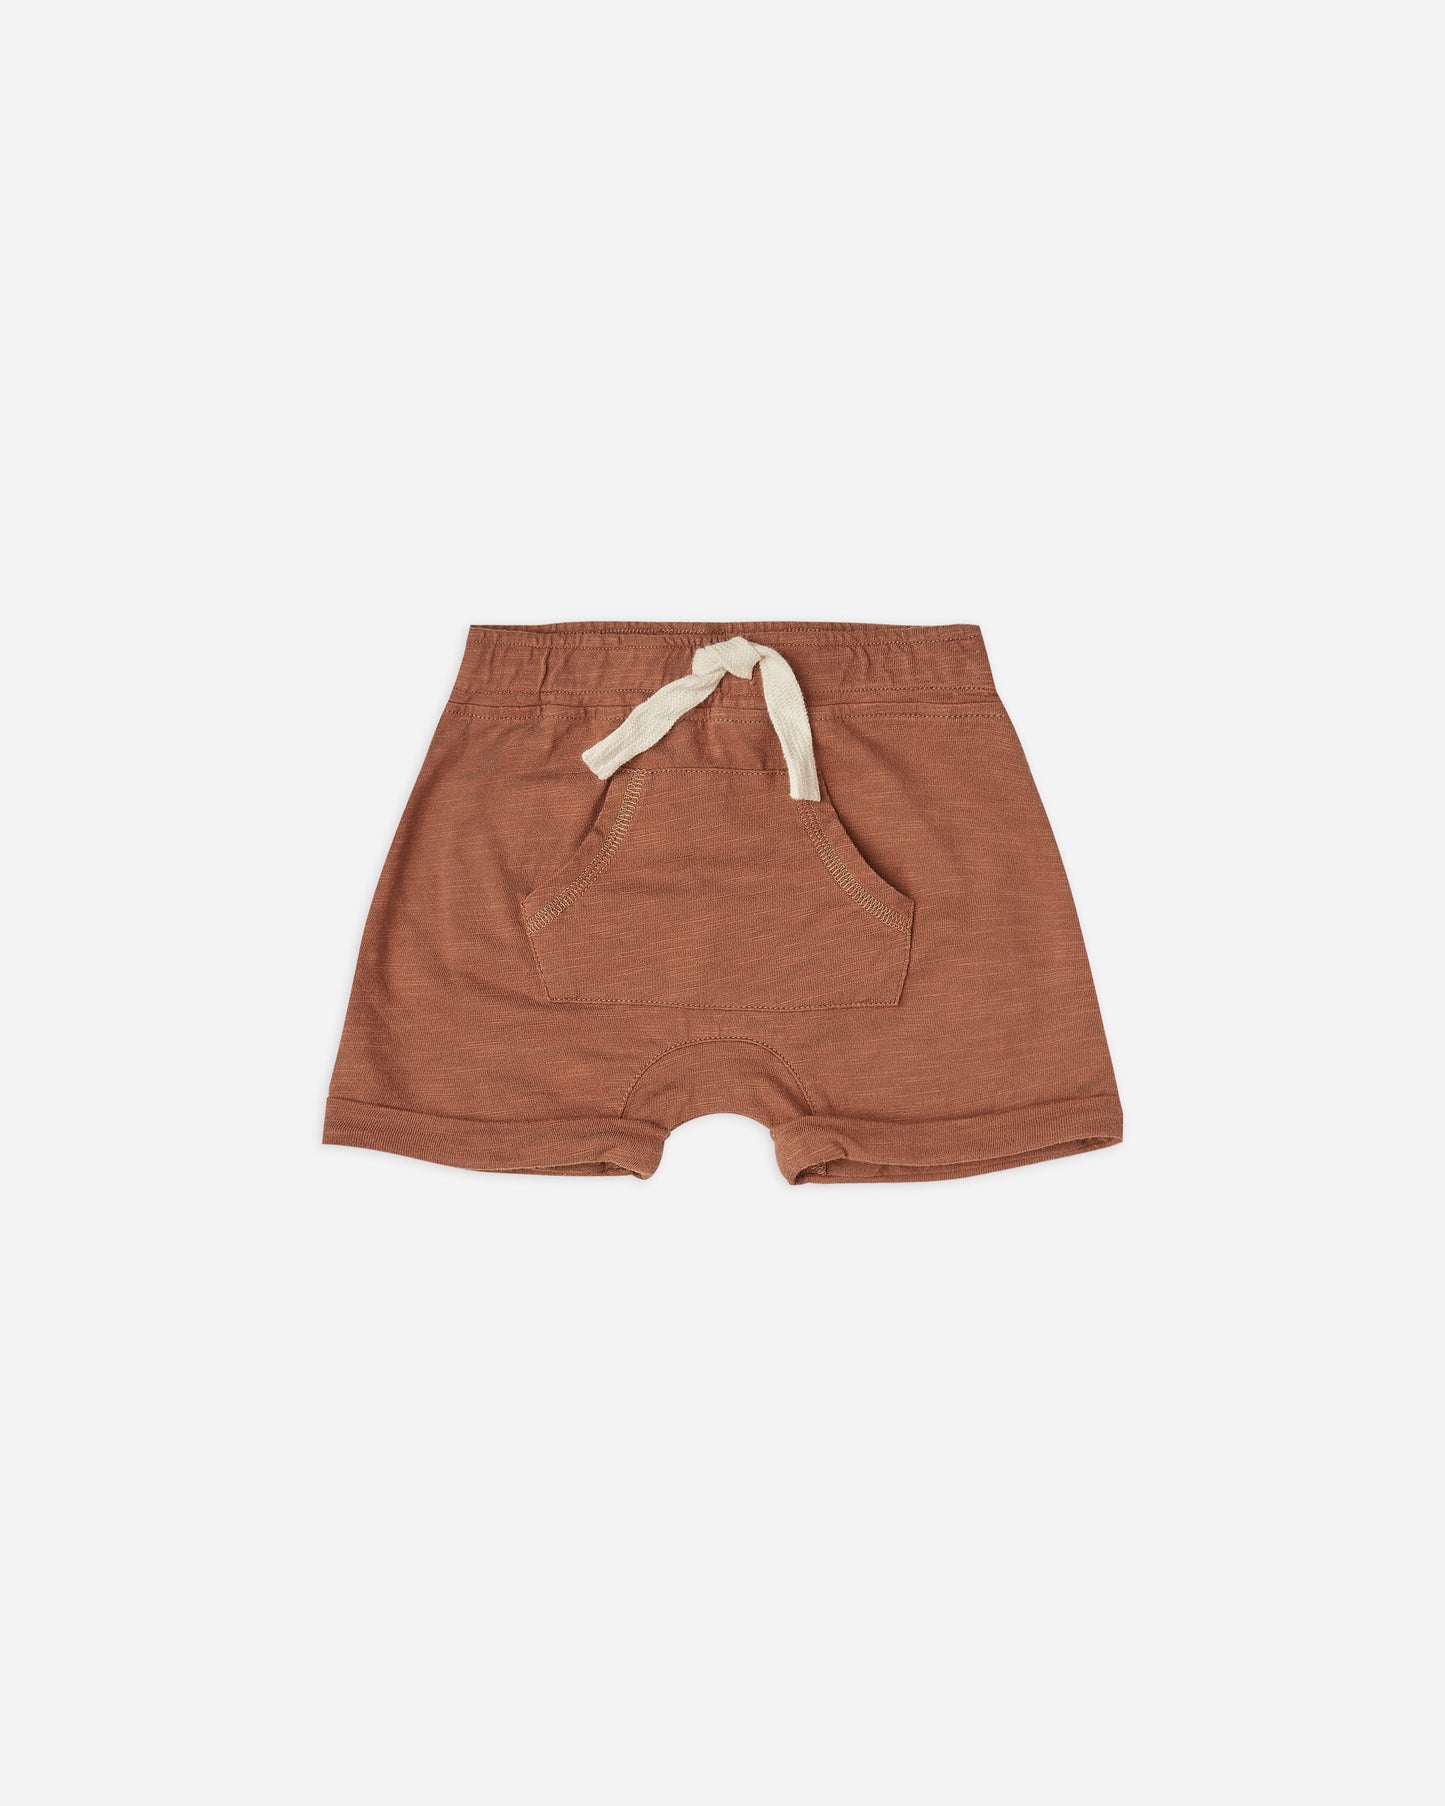 Rylee + Cru infant front pouch shorts